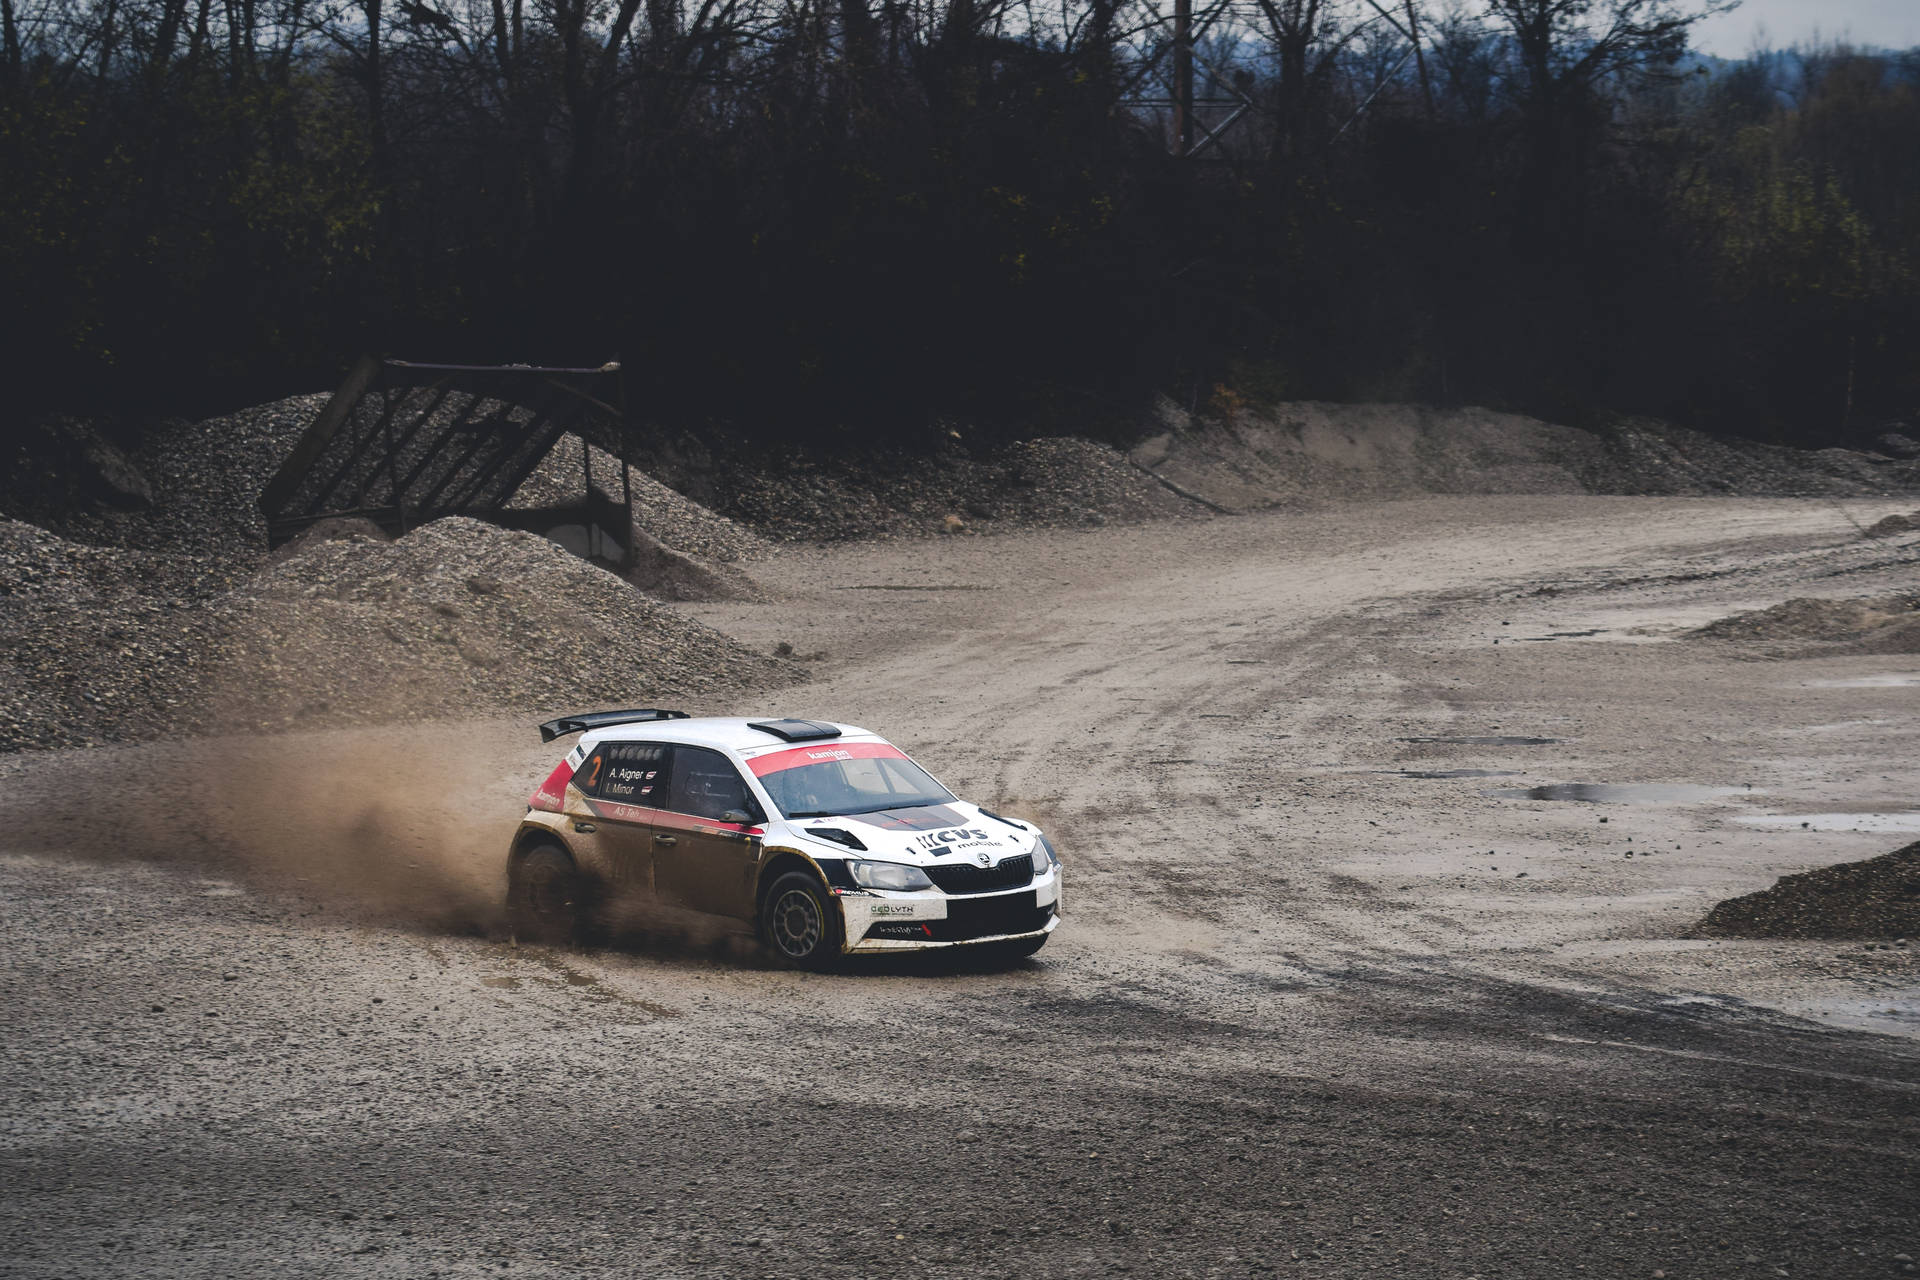 Stunning Capture Of A Skoda R5 Competing In Dirt Rally. Background